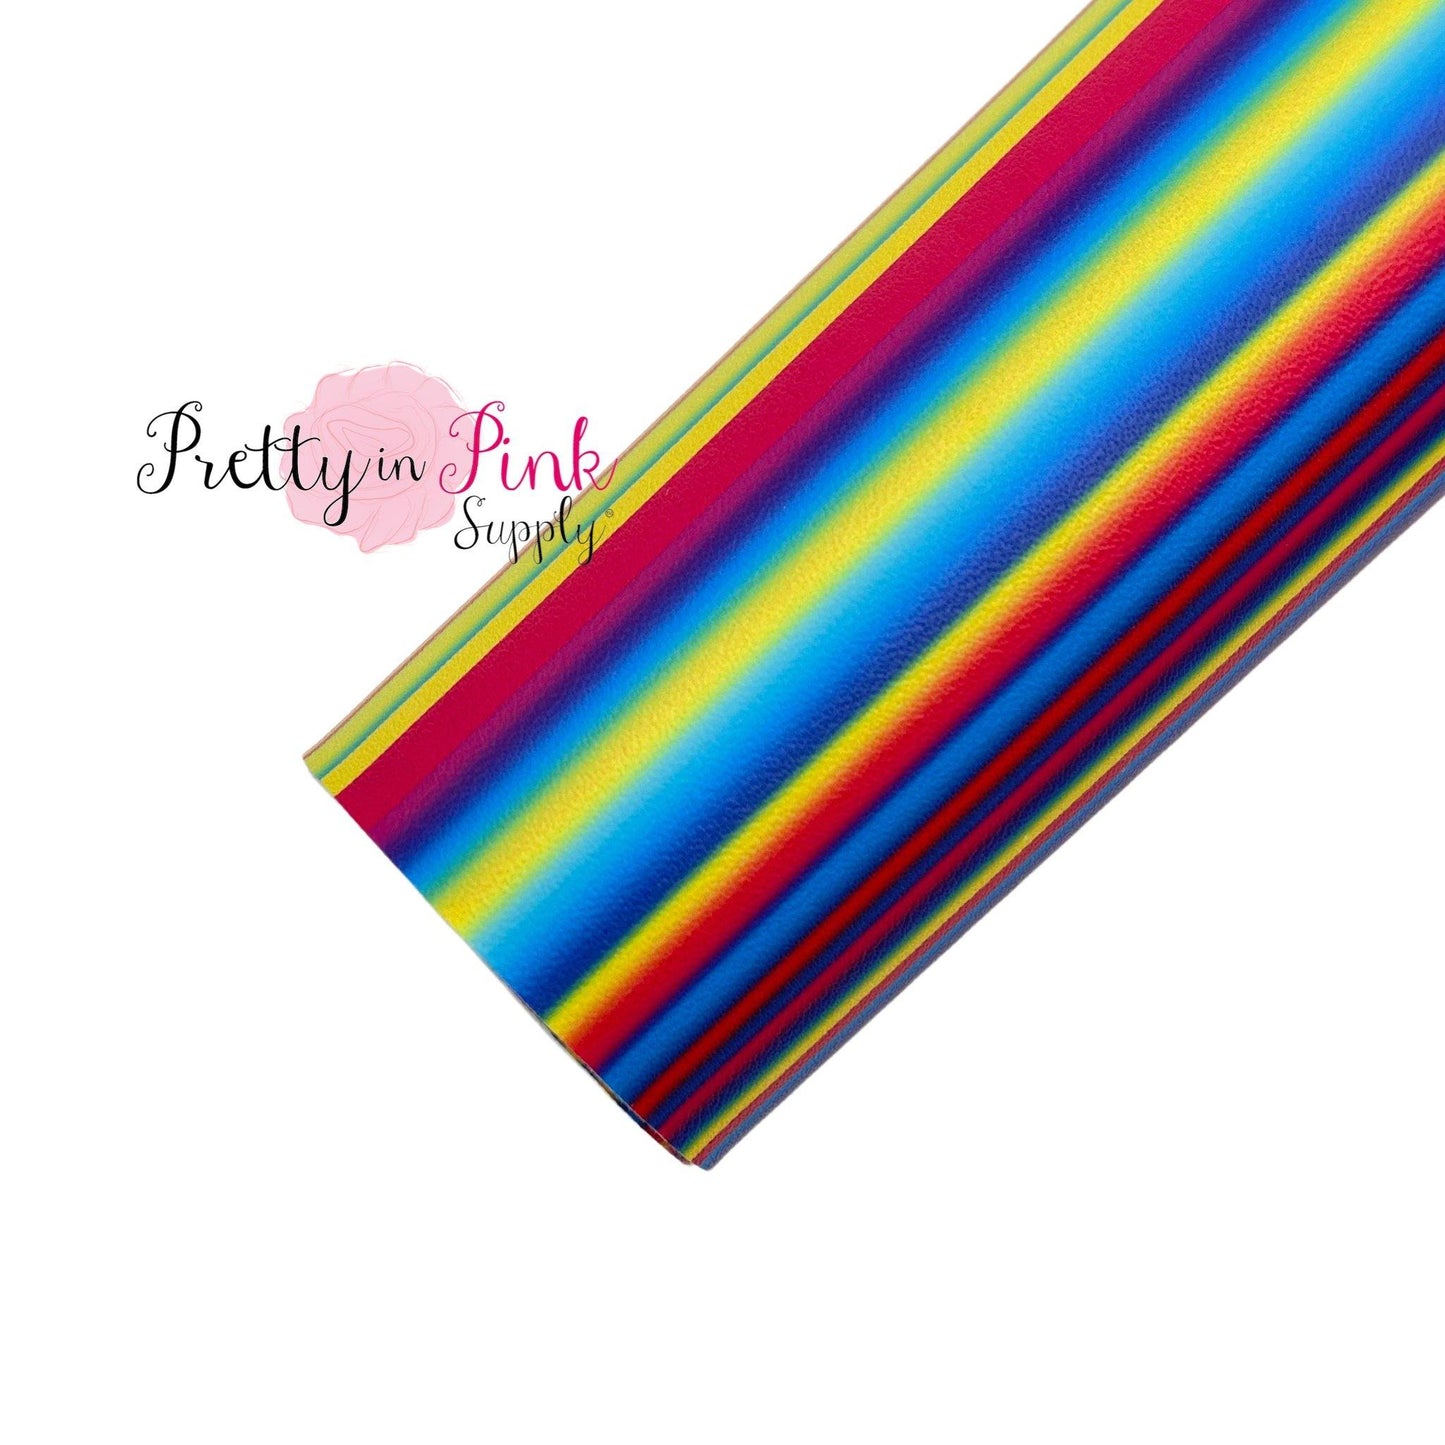 Fiesta Stripes | Faux Leather Fabric Sheet - Pretty in Pink Supply